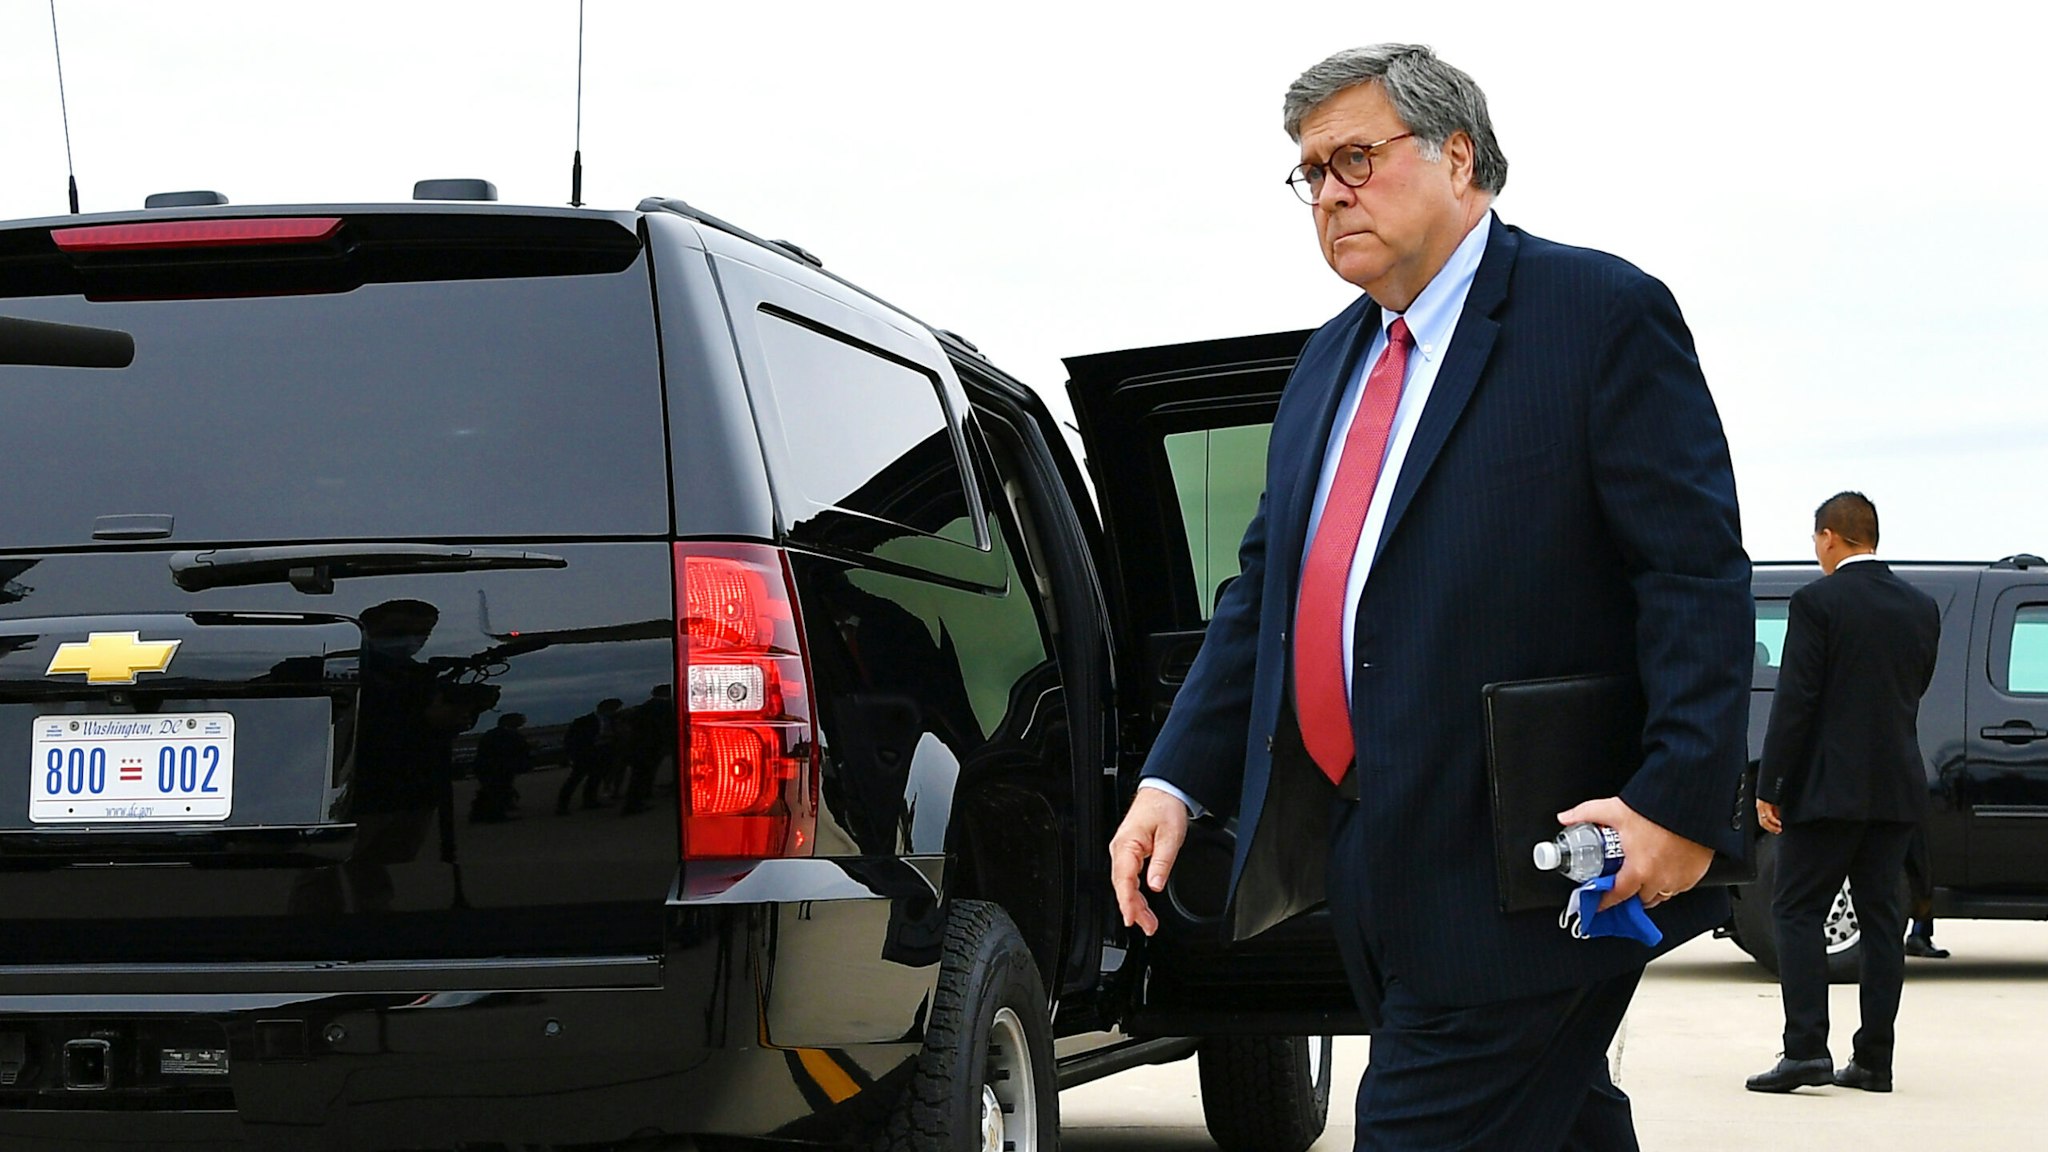 US President Donald Trump (C), with US Attorney General William Barr, arrive at Waukegan National Airport in Waukegan, Illinois en route Kenosha, Wisconsin, on September 1, 2020. - Trump is heading to Kenosha, Wisconsin to meet with law enforcement officials and to survey damage following civil unrest in the city.